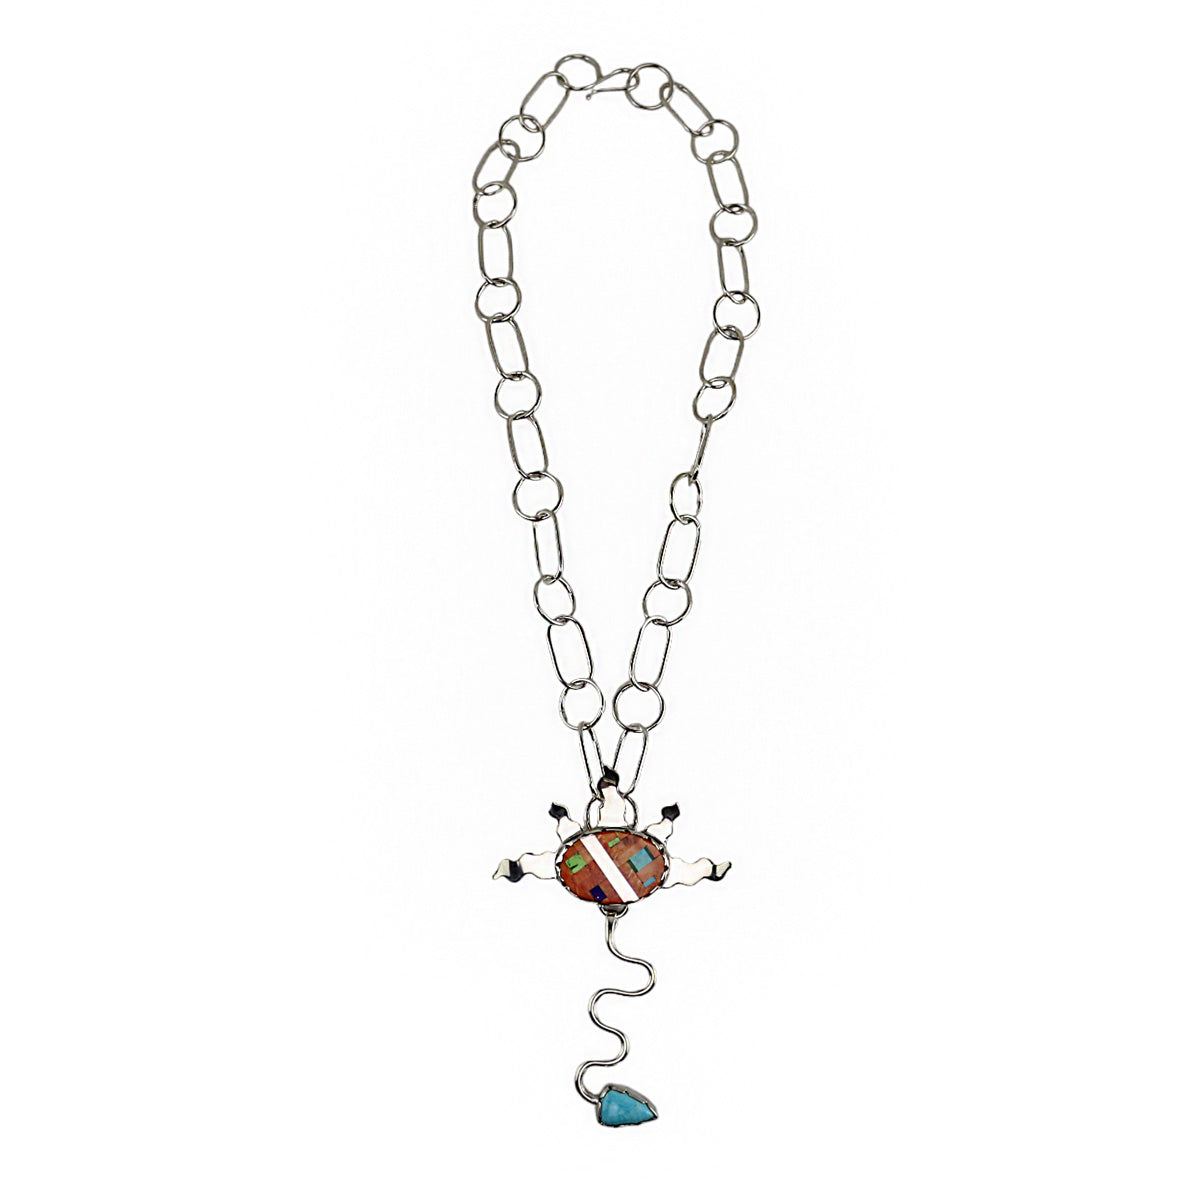 Rodney Coriz - Santo Domingo (Kewa) - Contemporary Female Orange Spiny Oyster with Multi-Stone Inlay and Sterling Silver Pendant with Handmade Chain, 27" length (J16134)